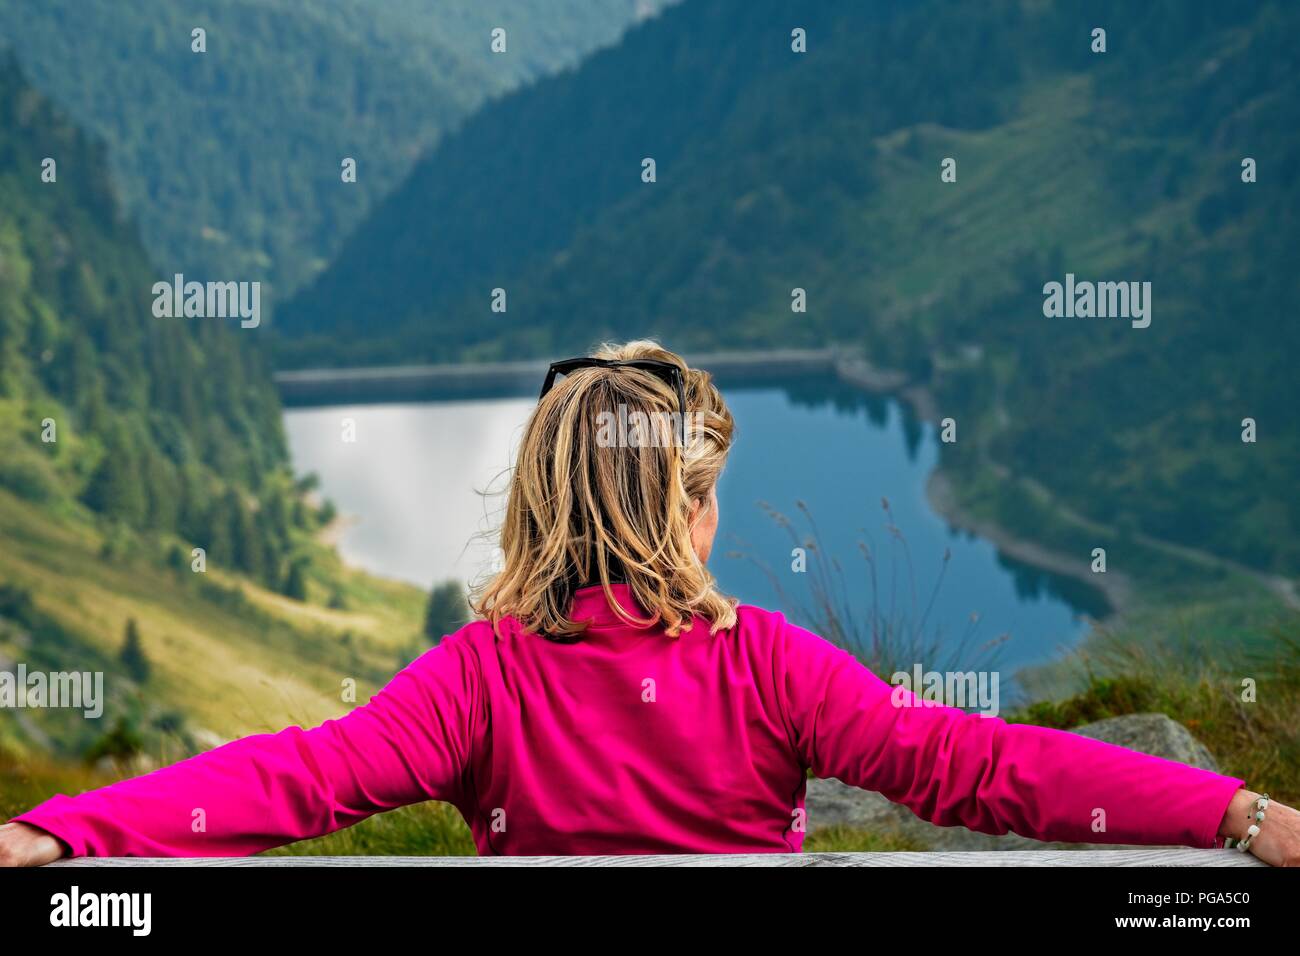 A blonde woman sitting on a bench and looking at the horizon. A mountain valley with a lake is visible in the background. Shot from behind Stock Photo